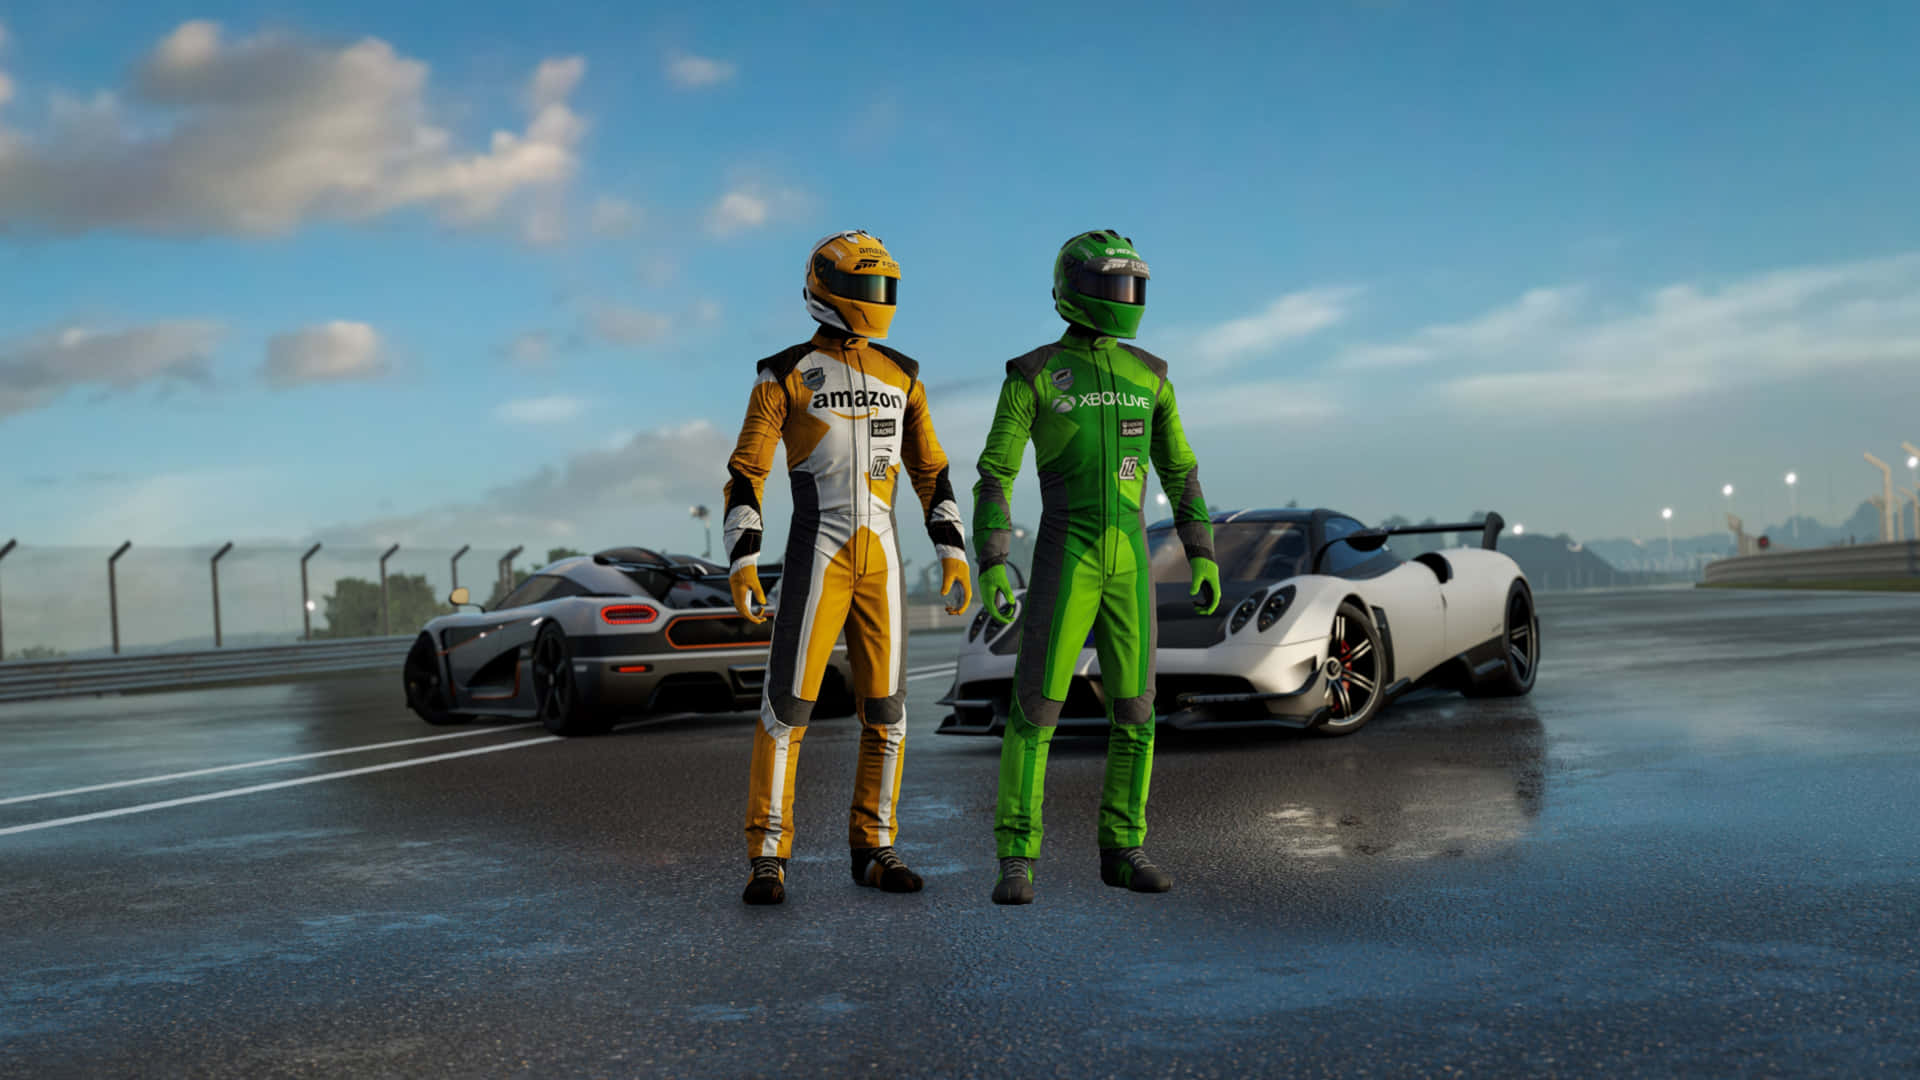 "Go Faster and Harder with 4K Forza Motorsport 7"